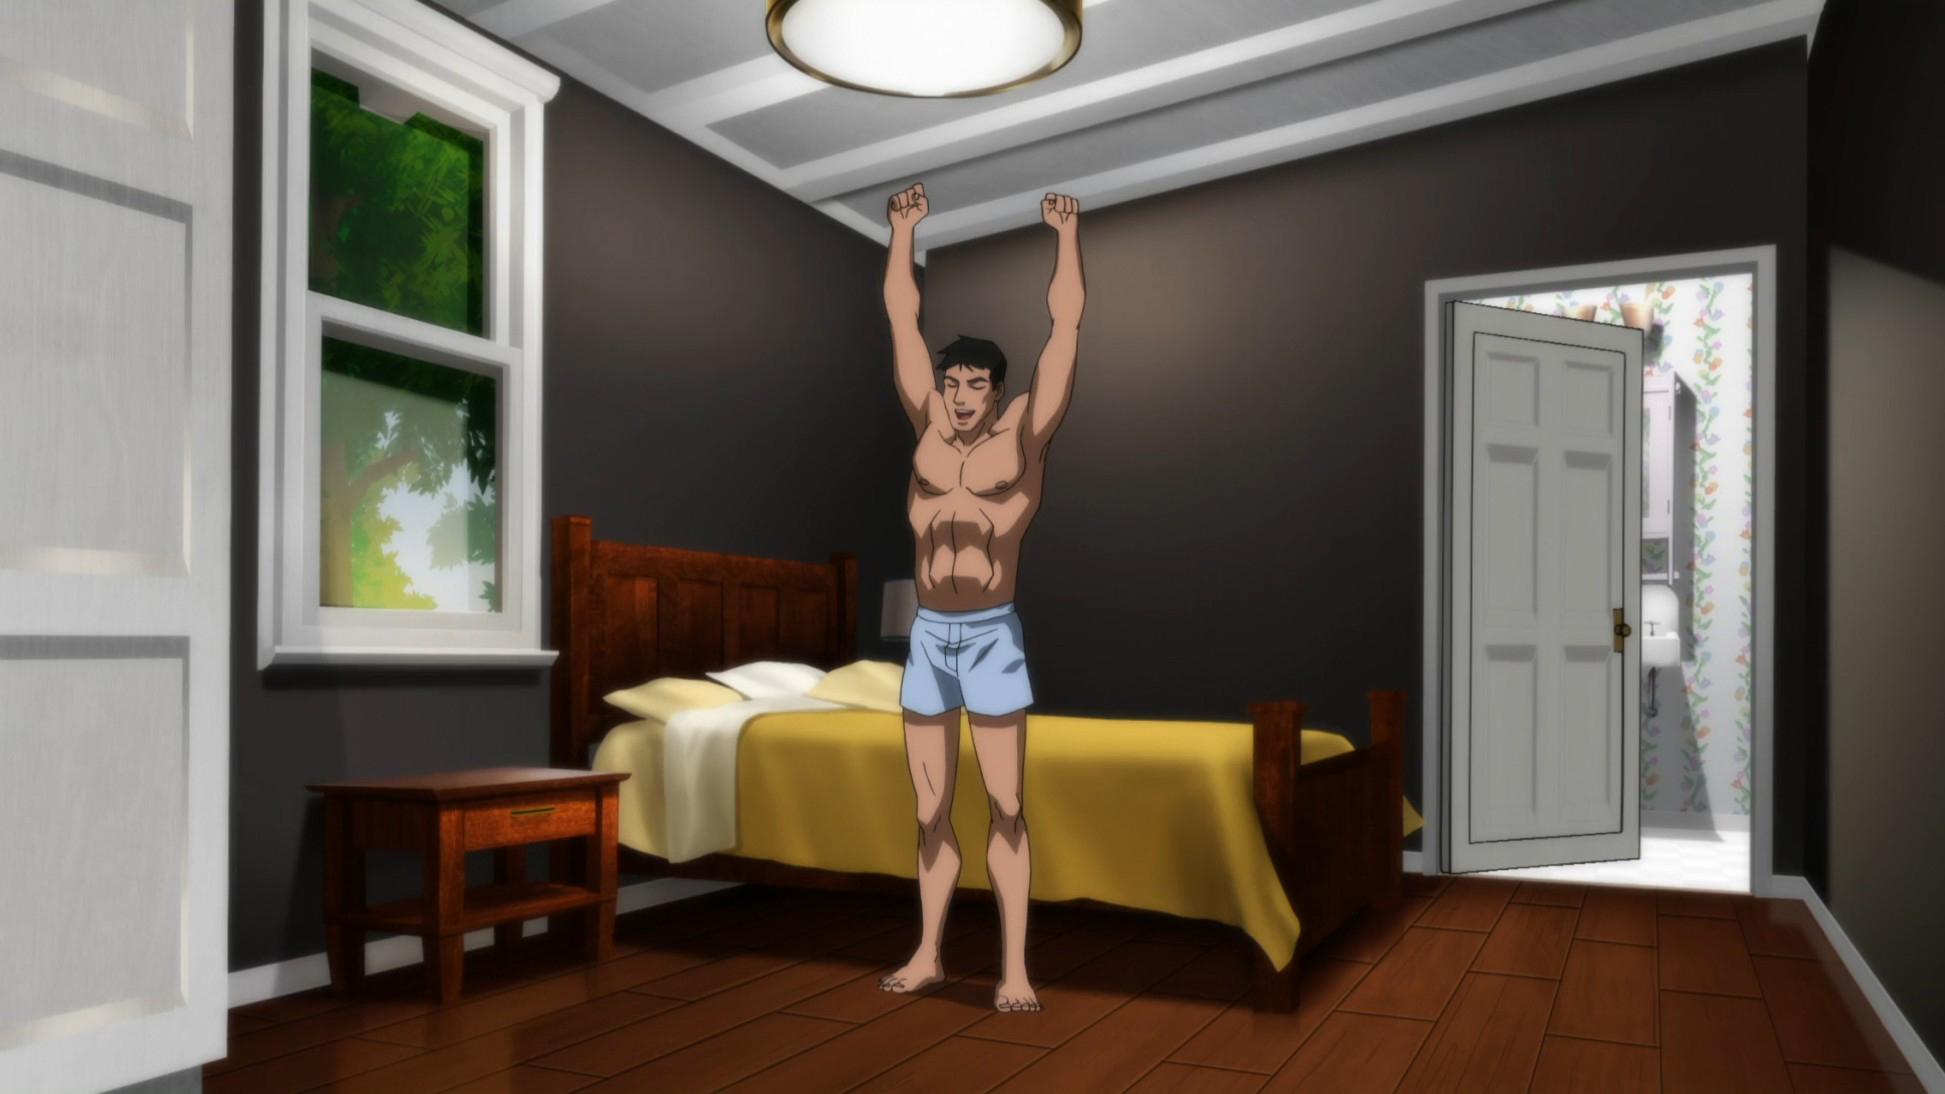 Please remove boxers and add morning wood. 